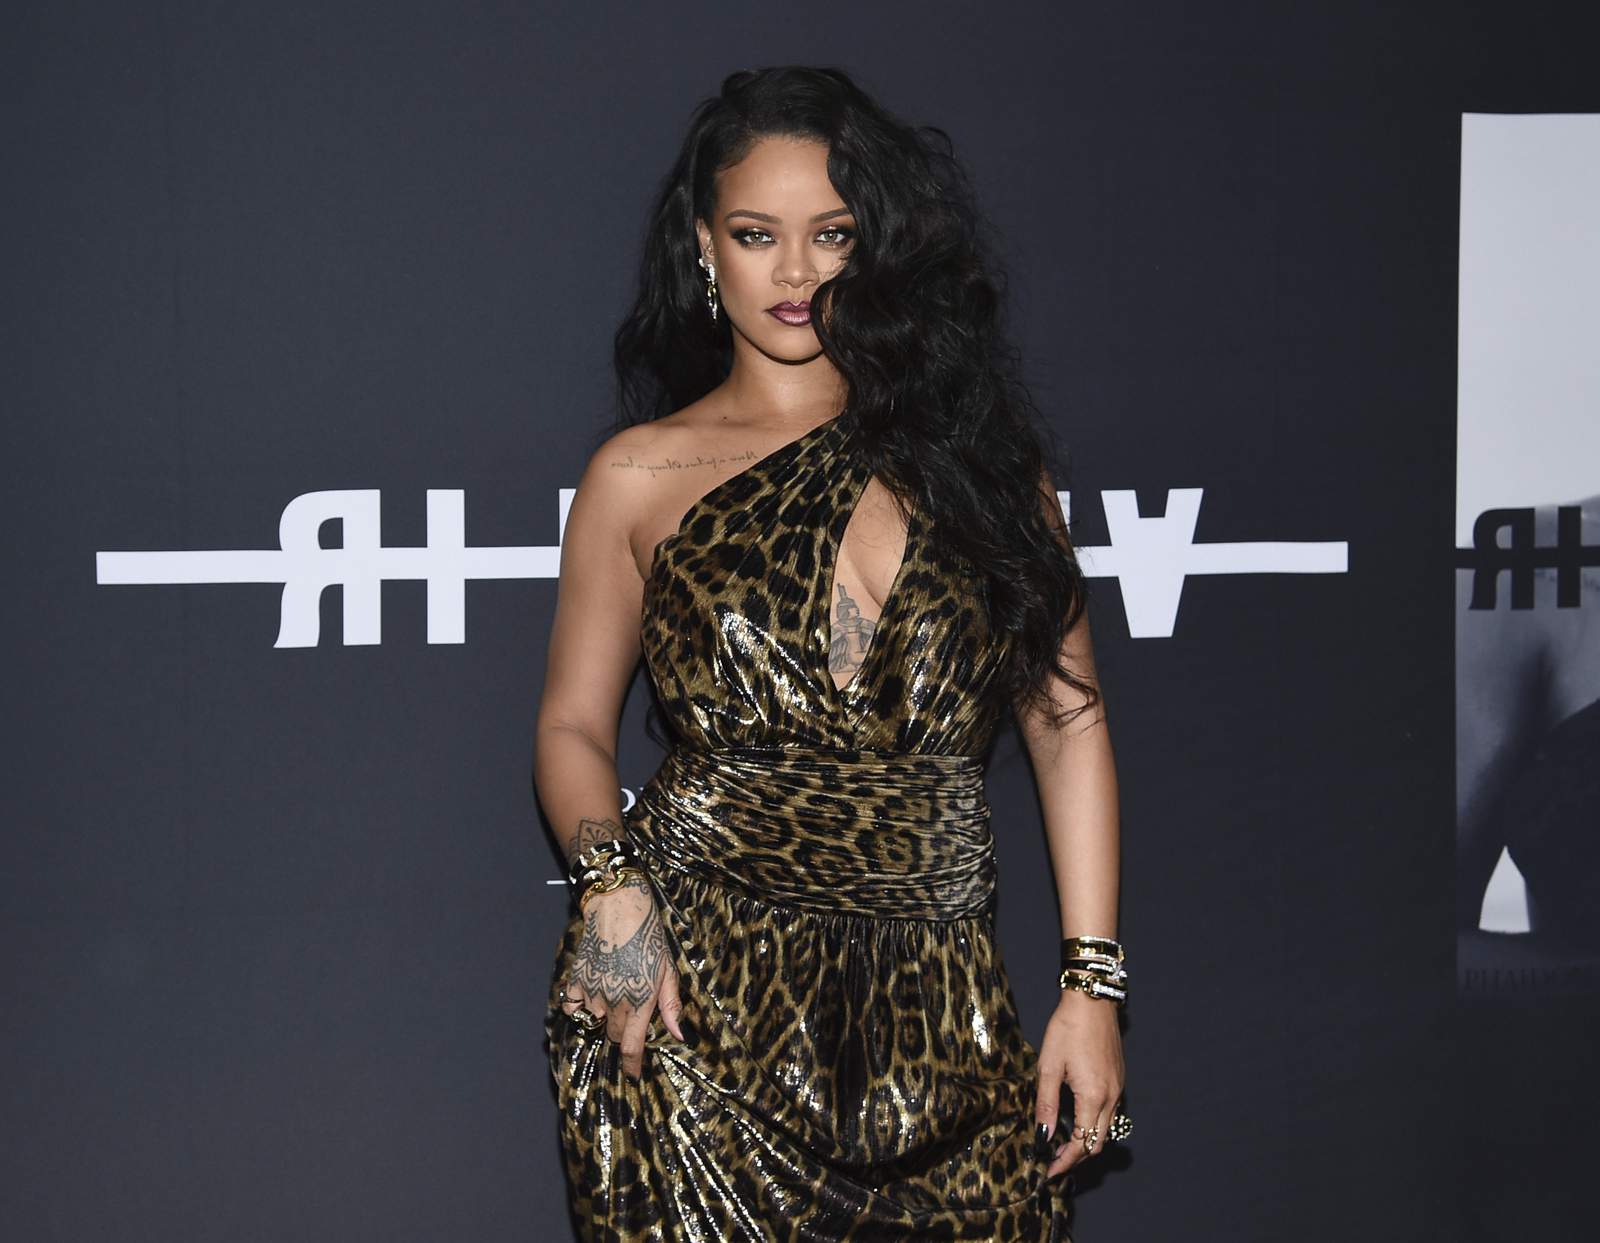 Rihanna on new album: ‘I just want to have fun with music’